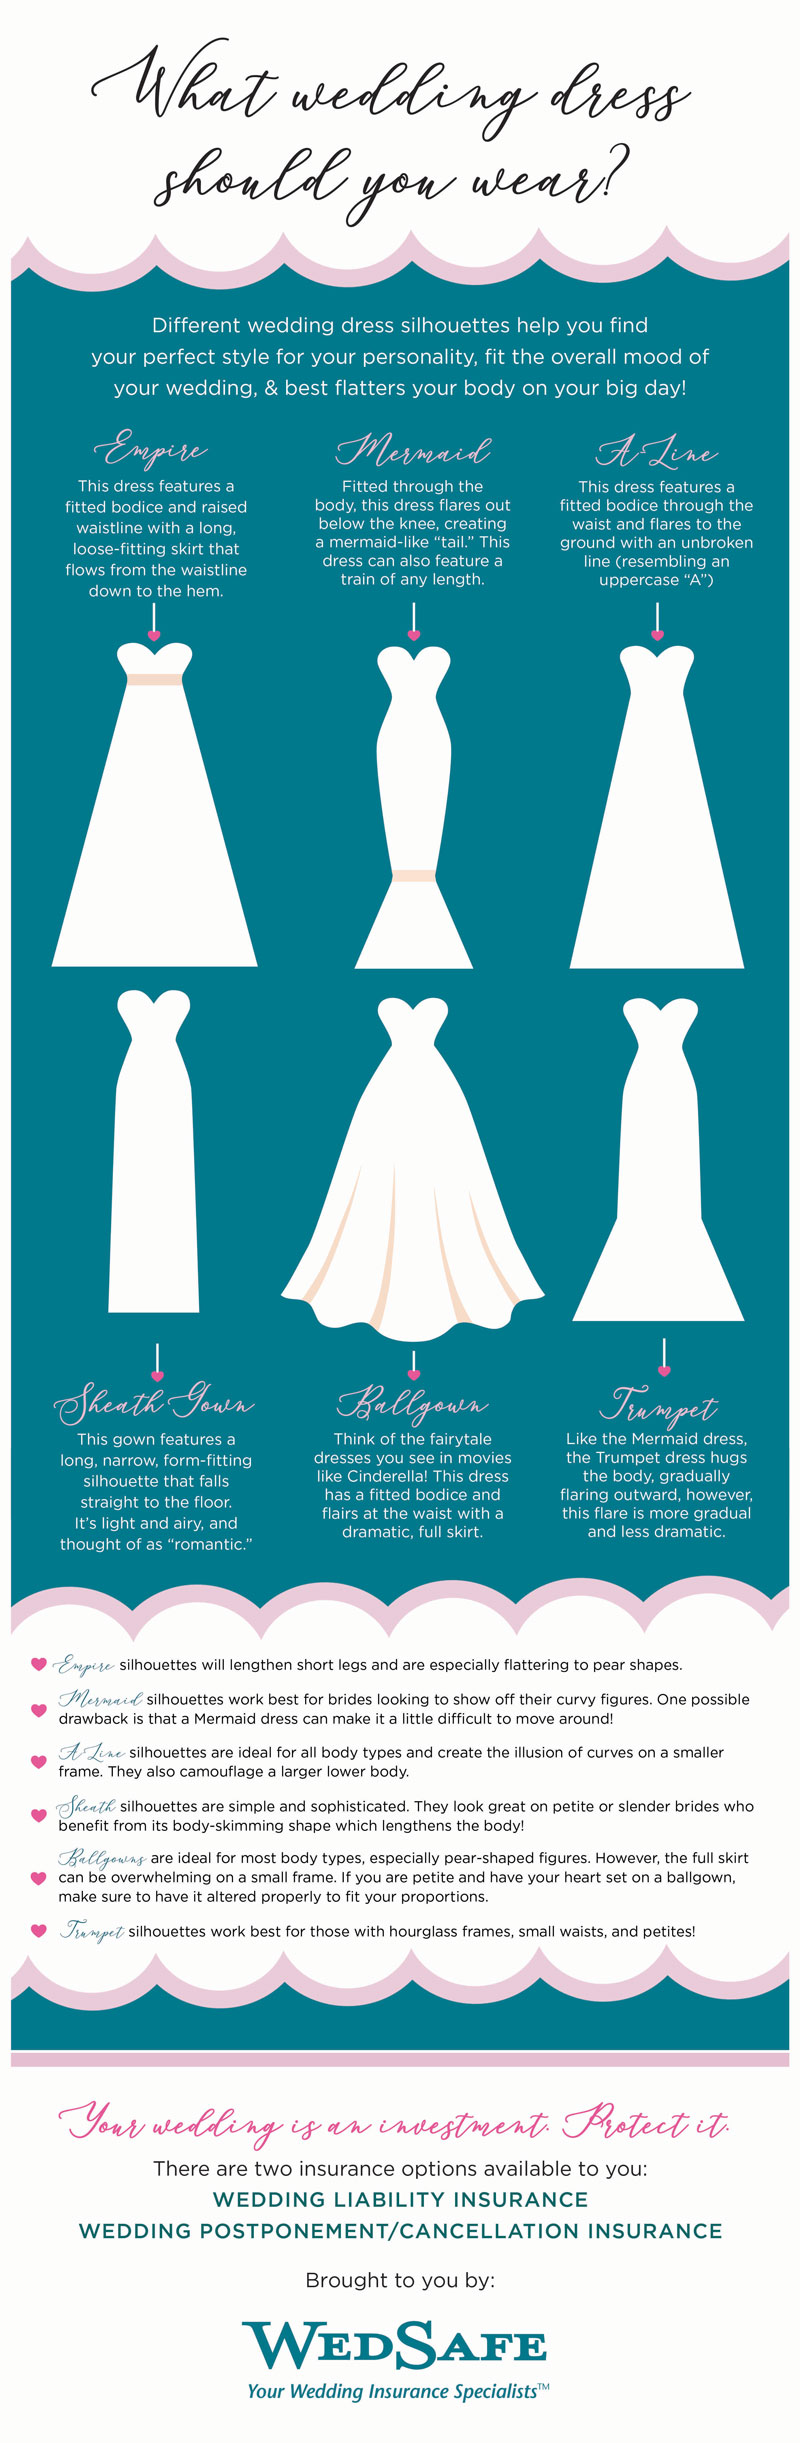 What Wedding Dress Should You Wear? 6 Bonus Tips on Selecting the